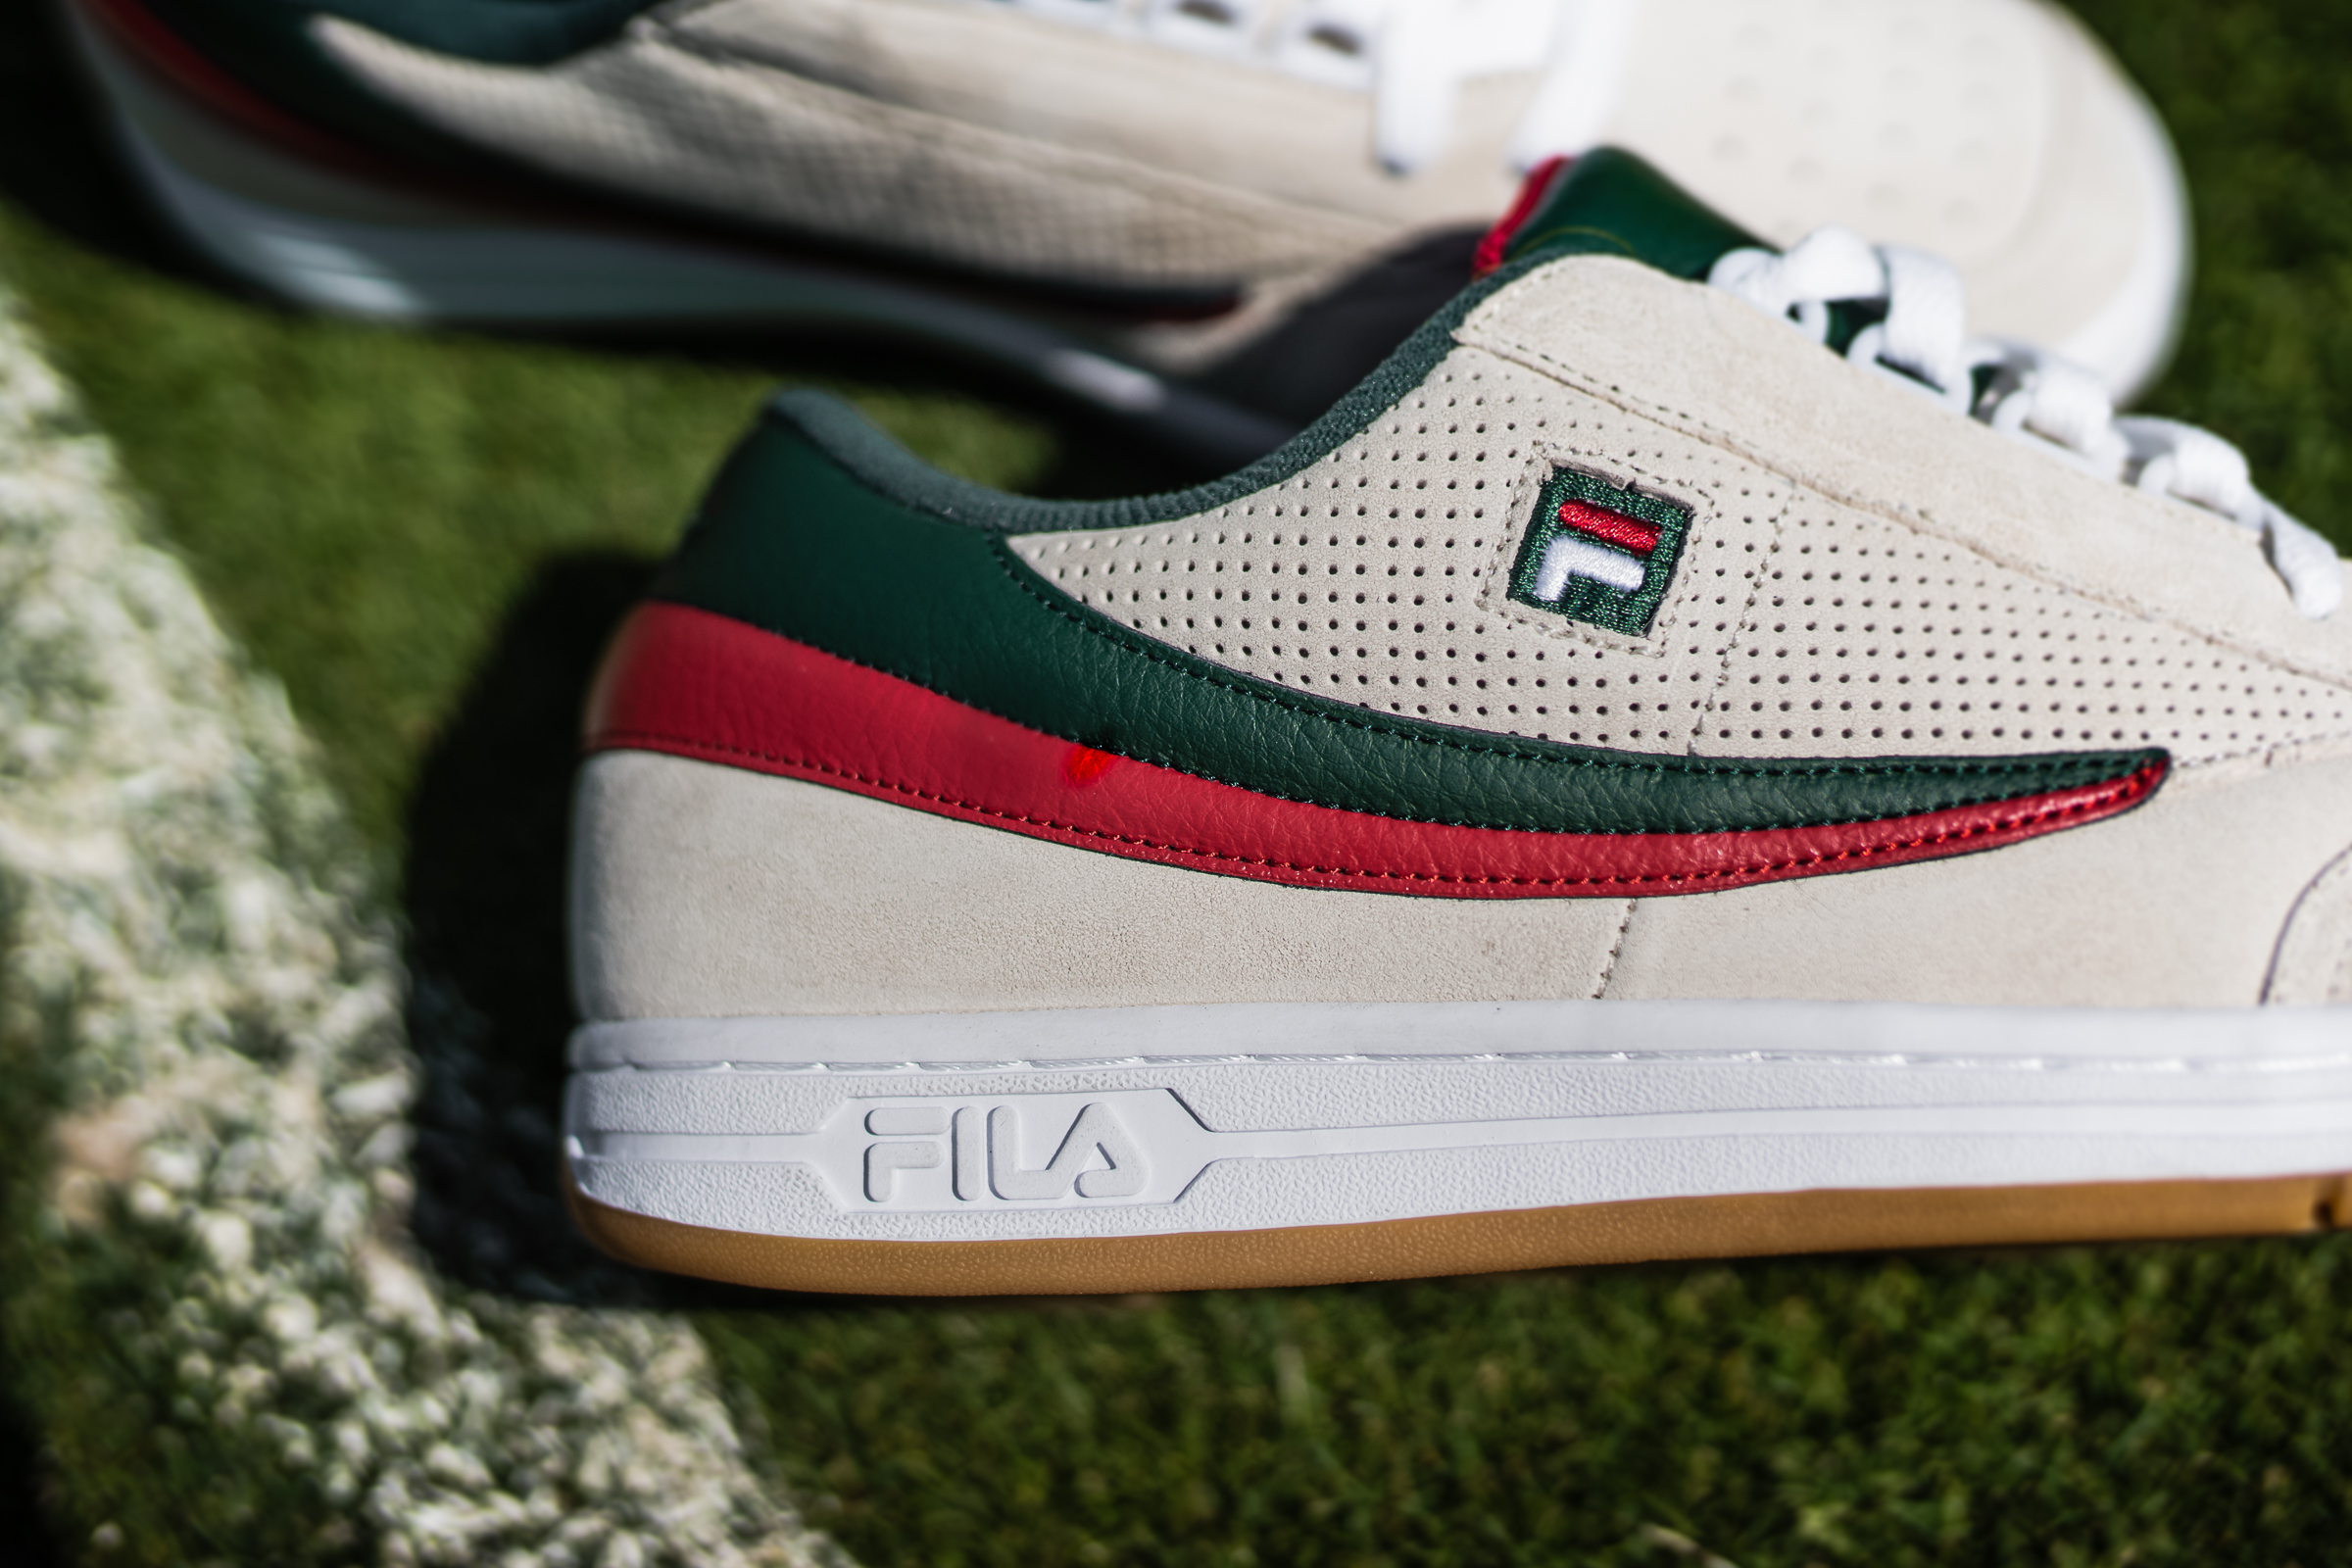 Nodig hebben school Vertrappen Style Seeds Exclusive: The Fila x Packer x ITHF Collaboration – The Tennis  Island